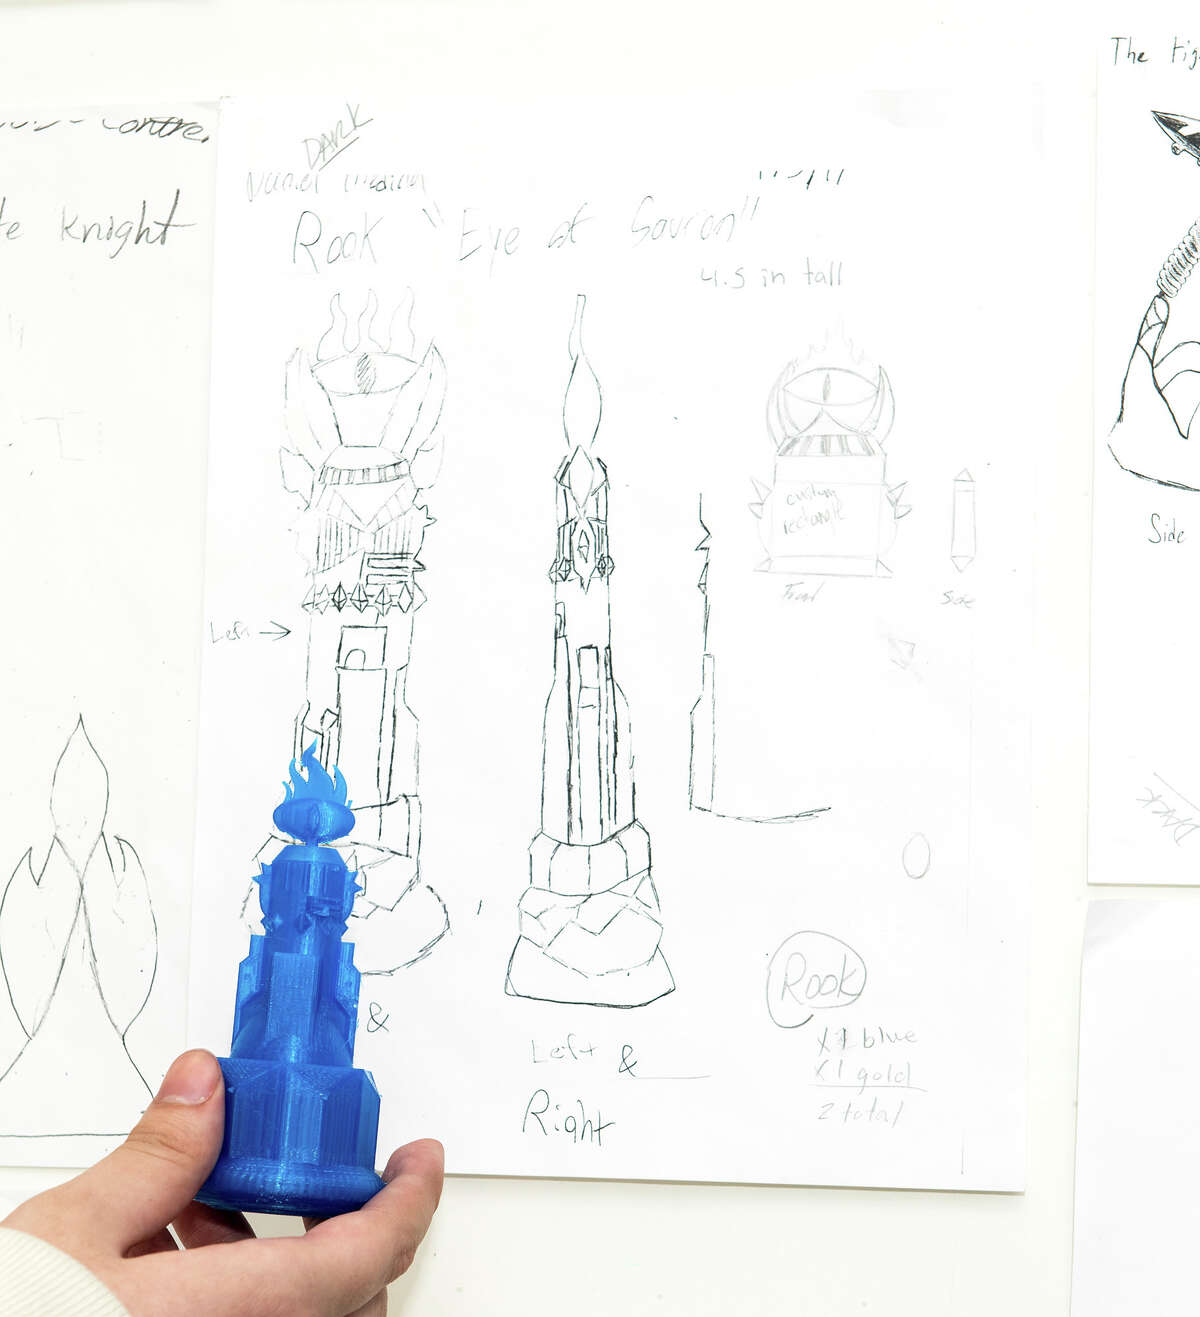 A student holds a unique 3-D printed chess piece next to the original art work on Friday, January 20, 2017 at the Alexander High School Library.